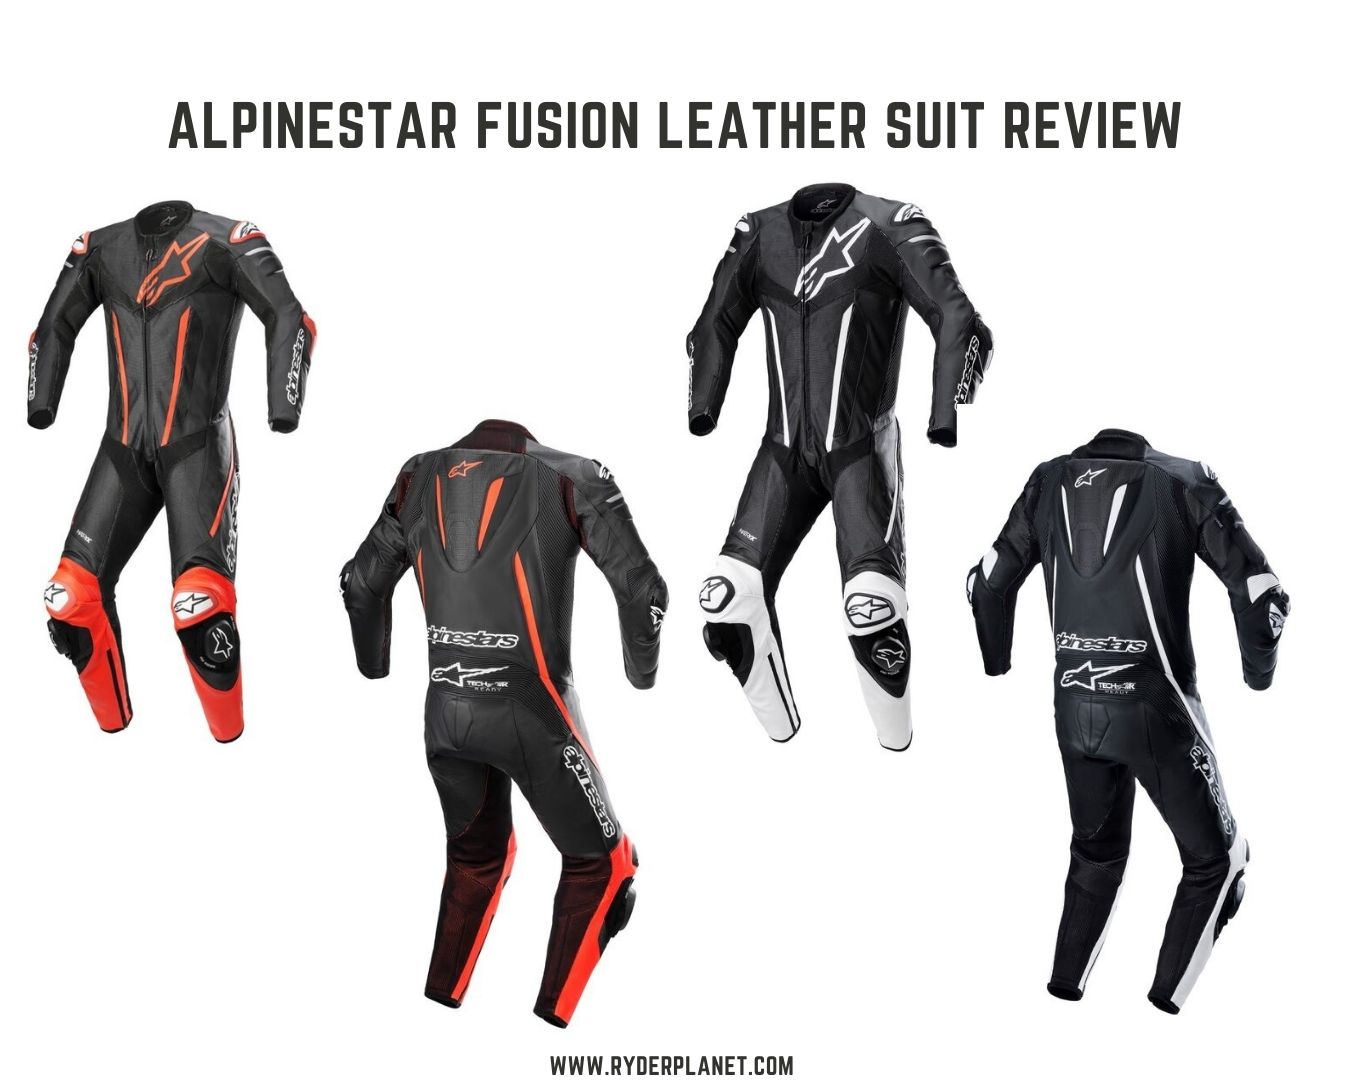 Alpinestars Fusion Leather Suit Review